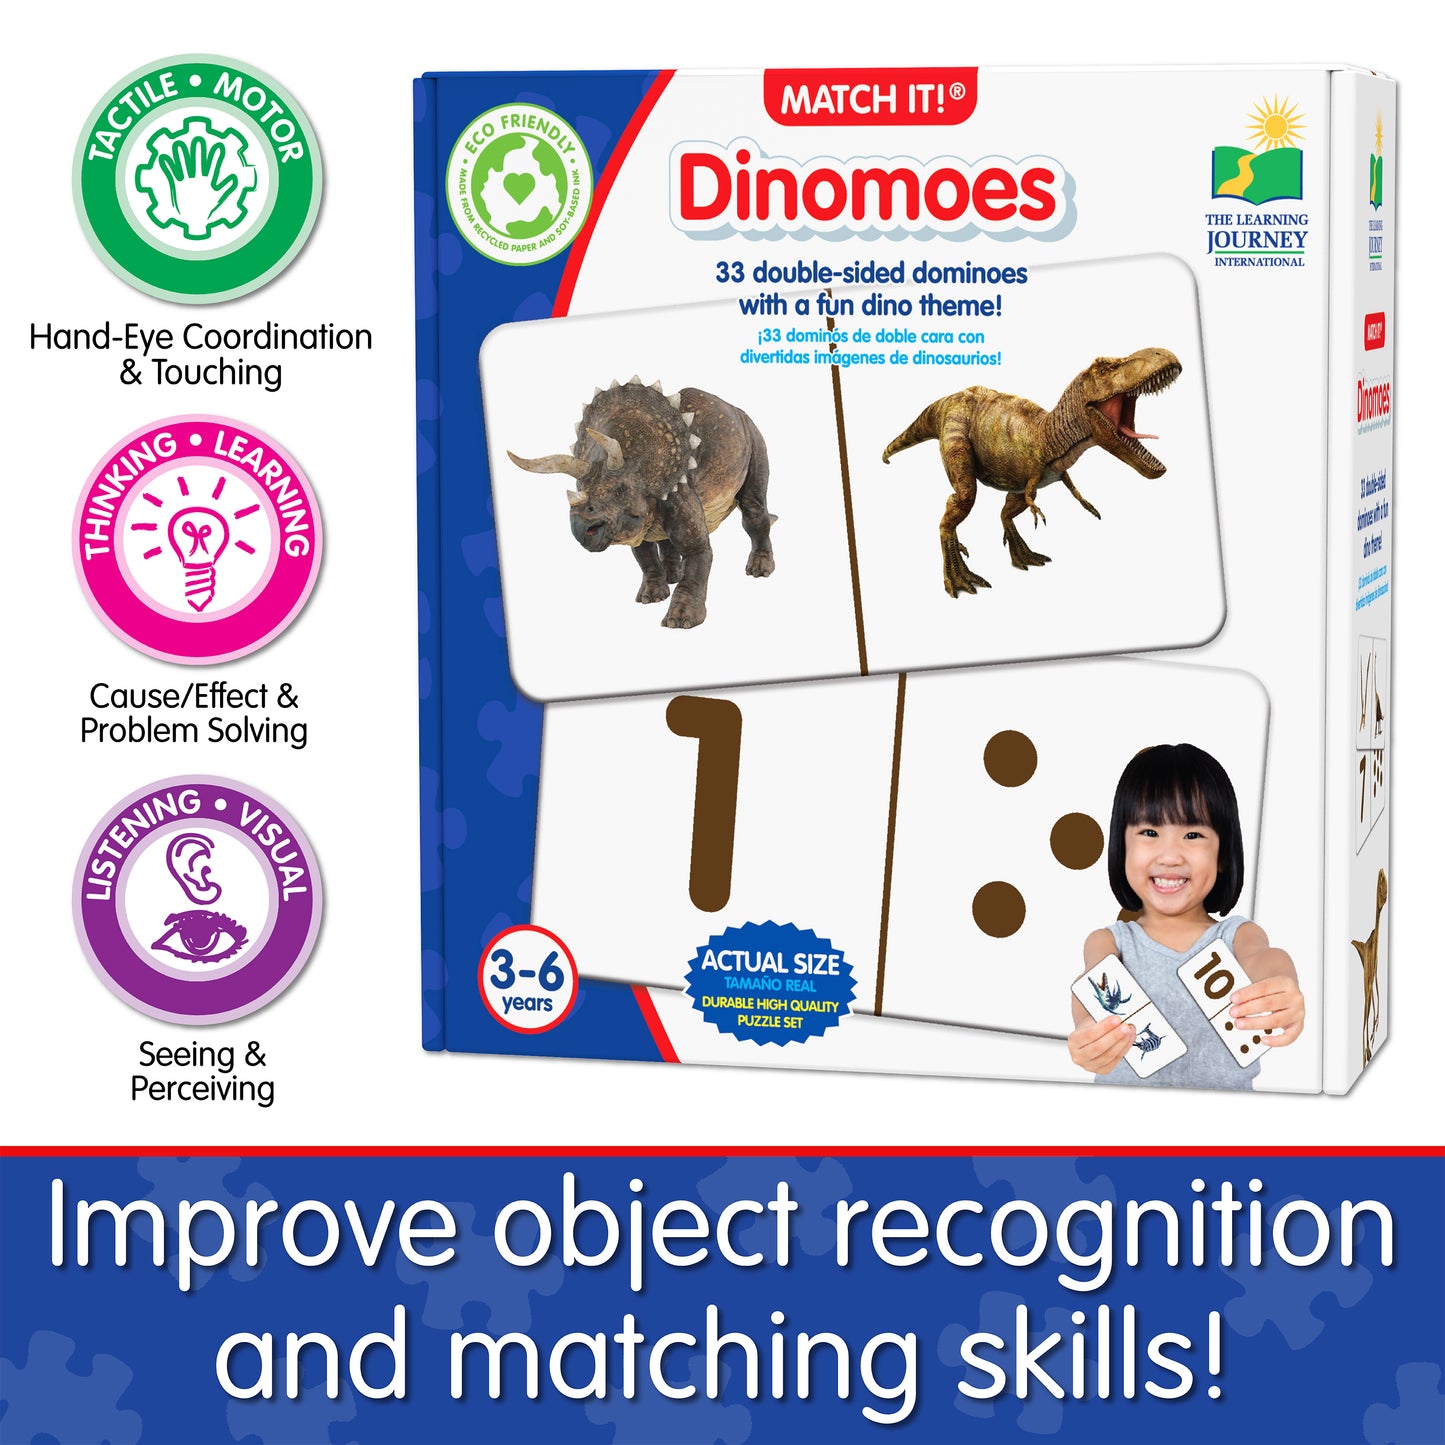 Infographic about Match It - Dinomoes' educational benefits that says, "Improve object recognition and matching skills!"